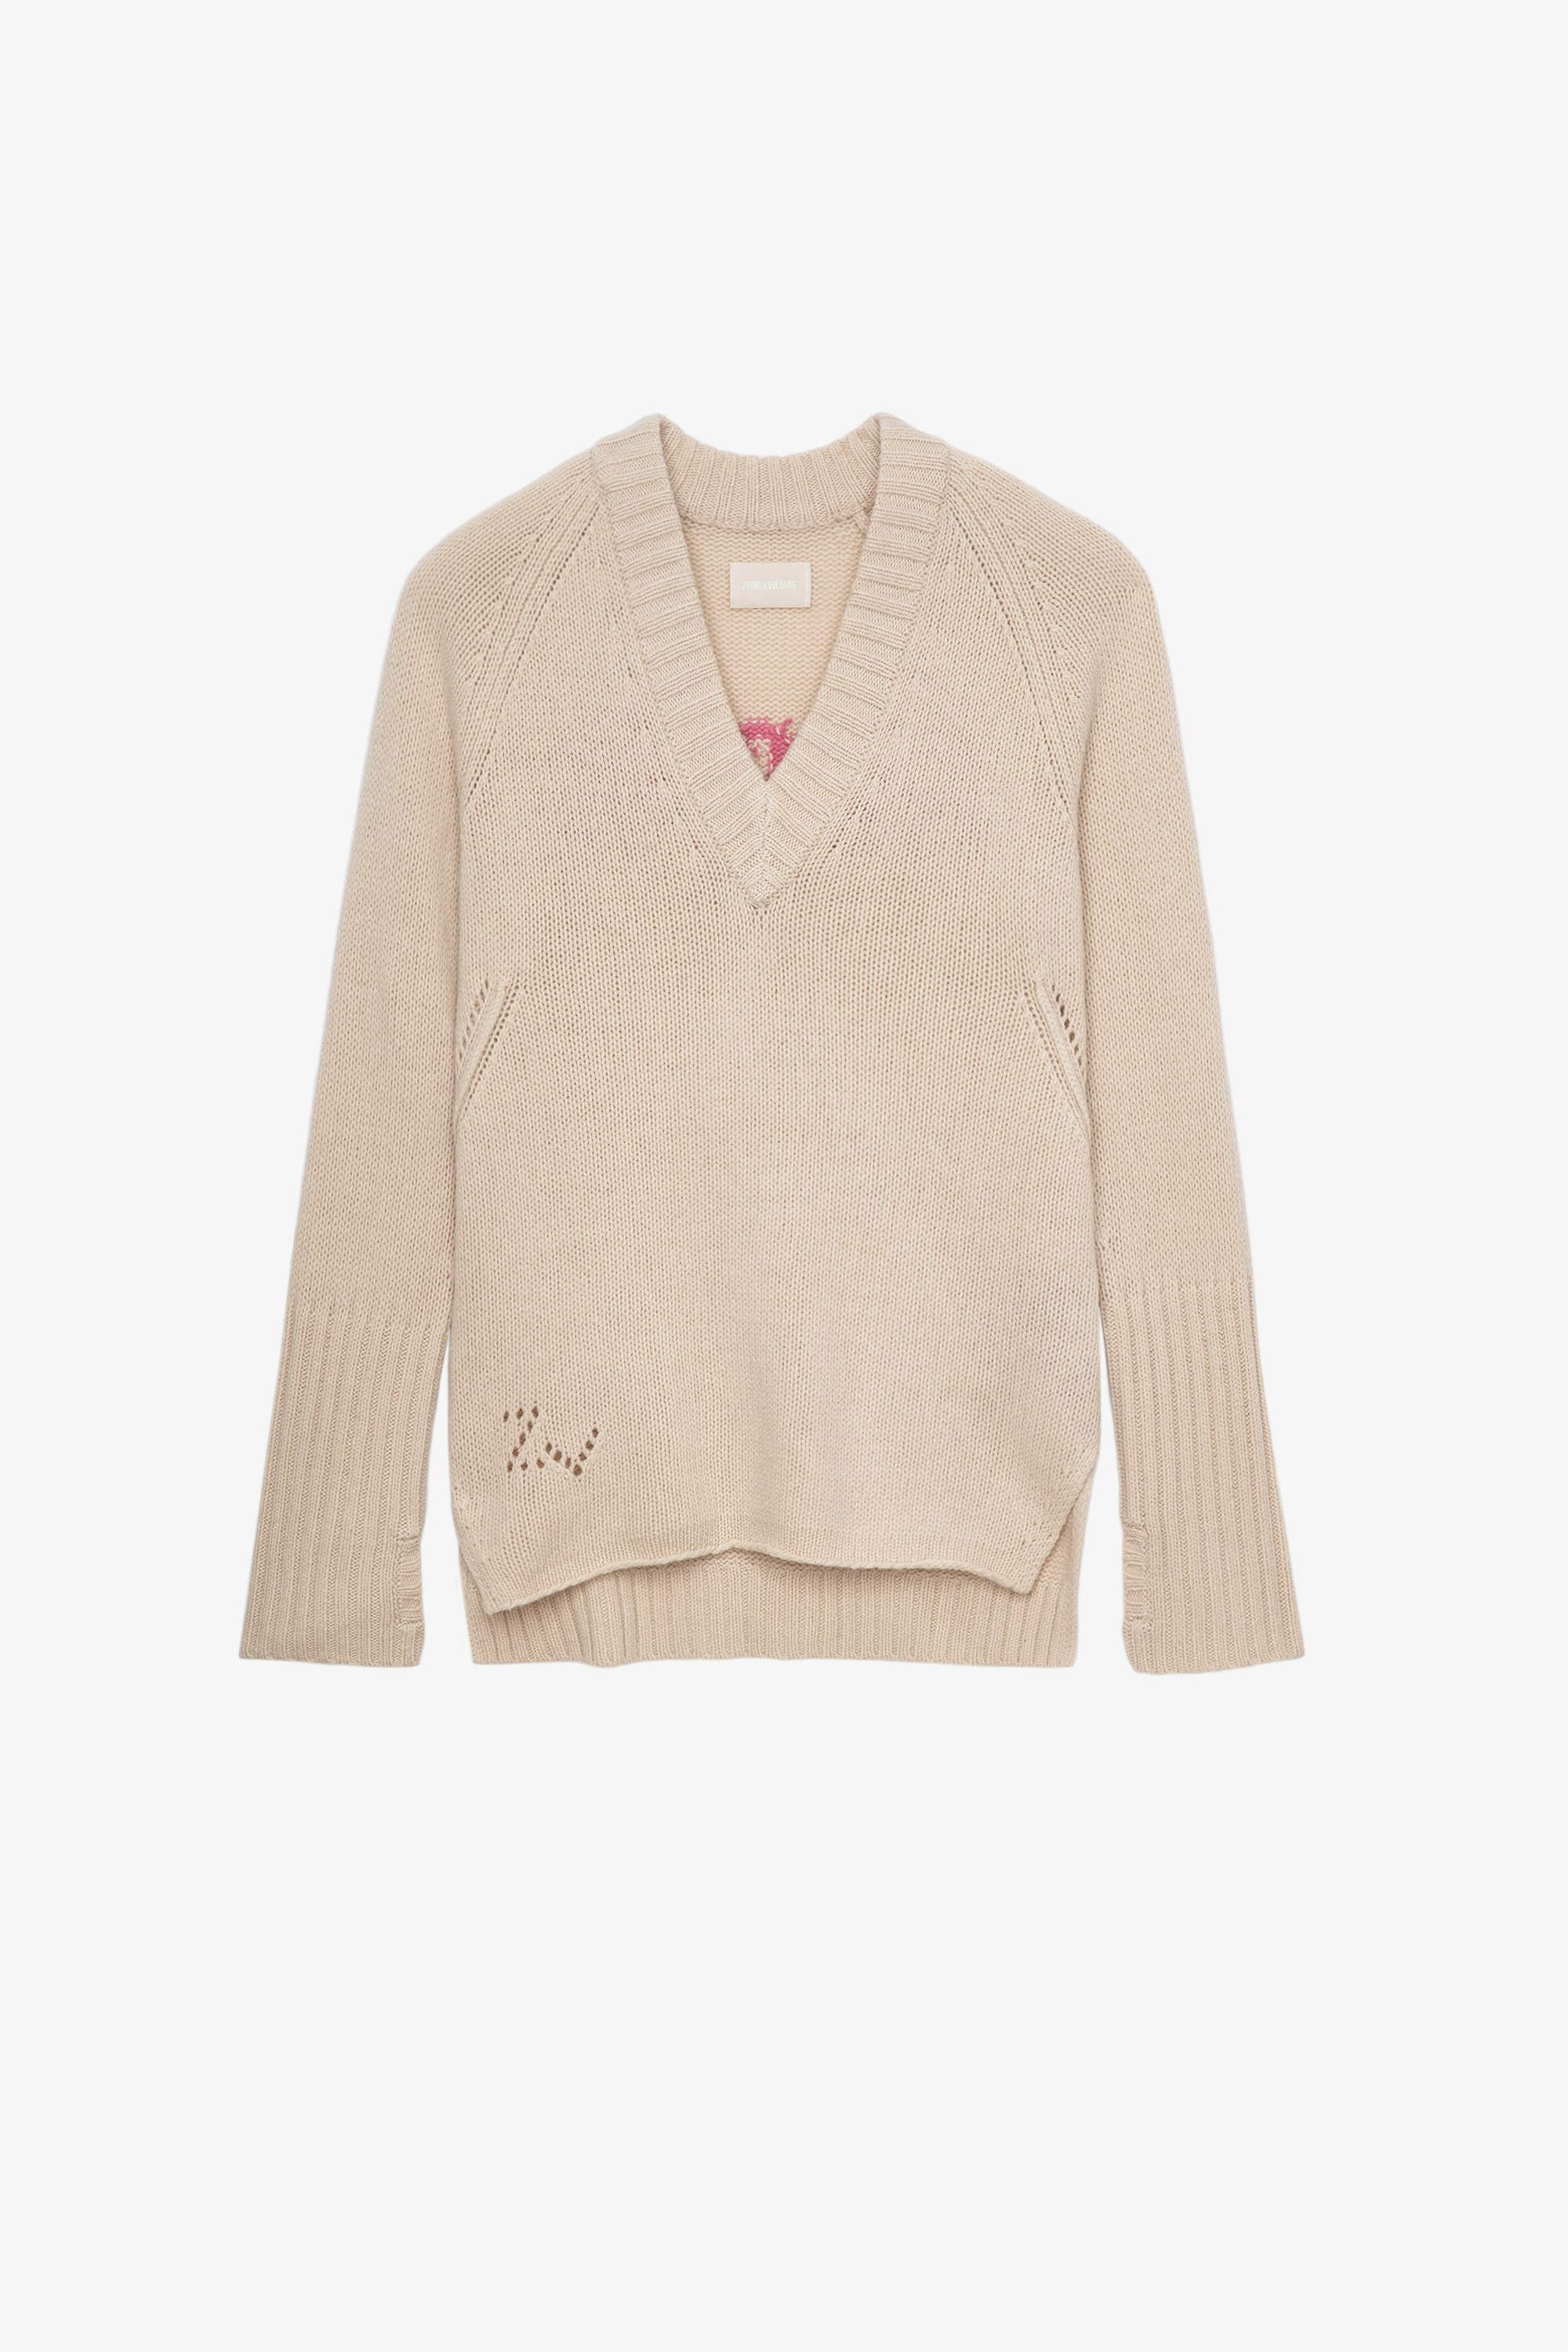 Valmy Amour ニット Women’s beige knit jumper with “amour” emblazoned on the back